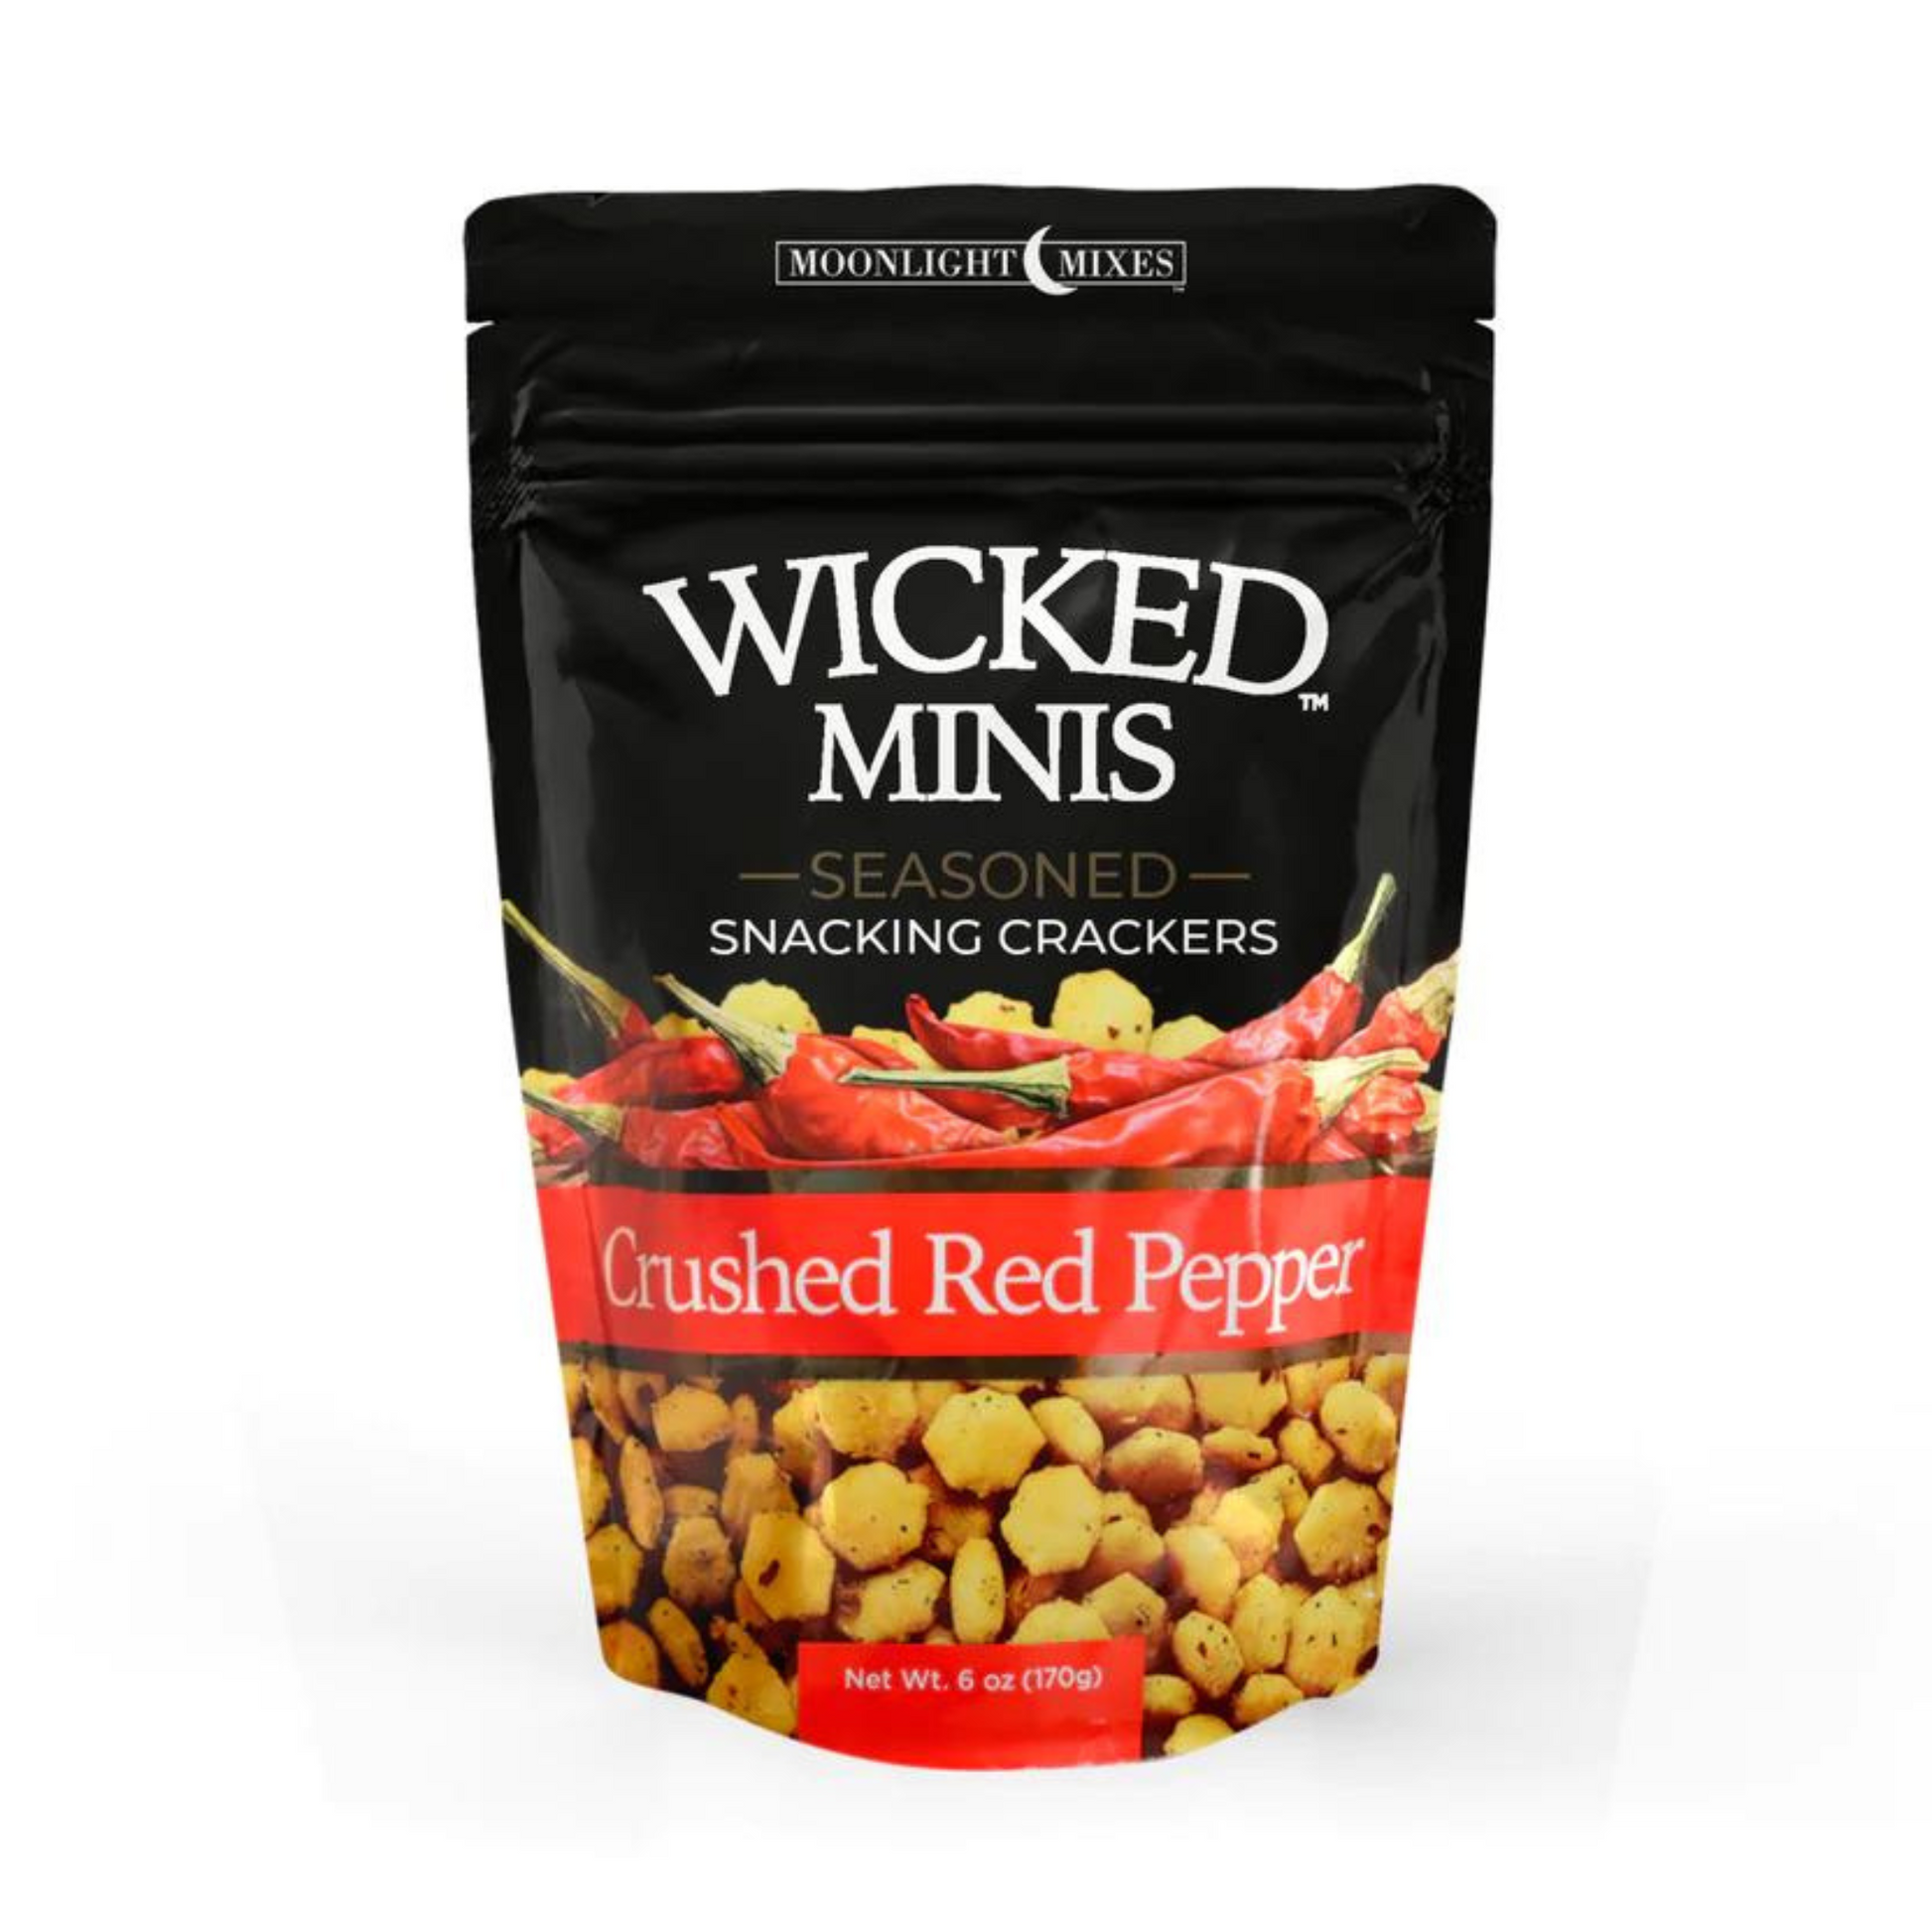 Wicked Minis in Crushed Red Pepper